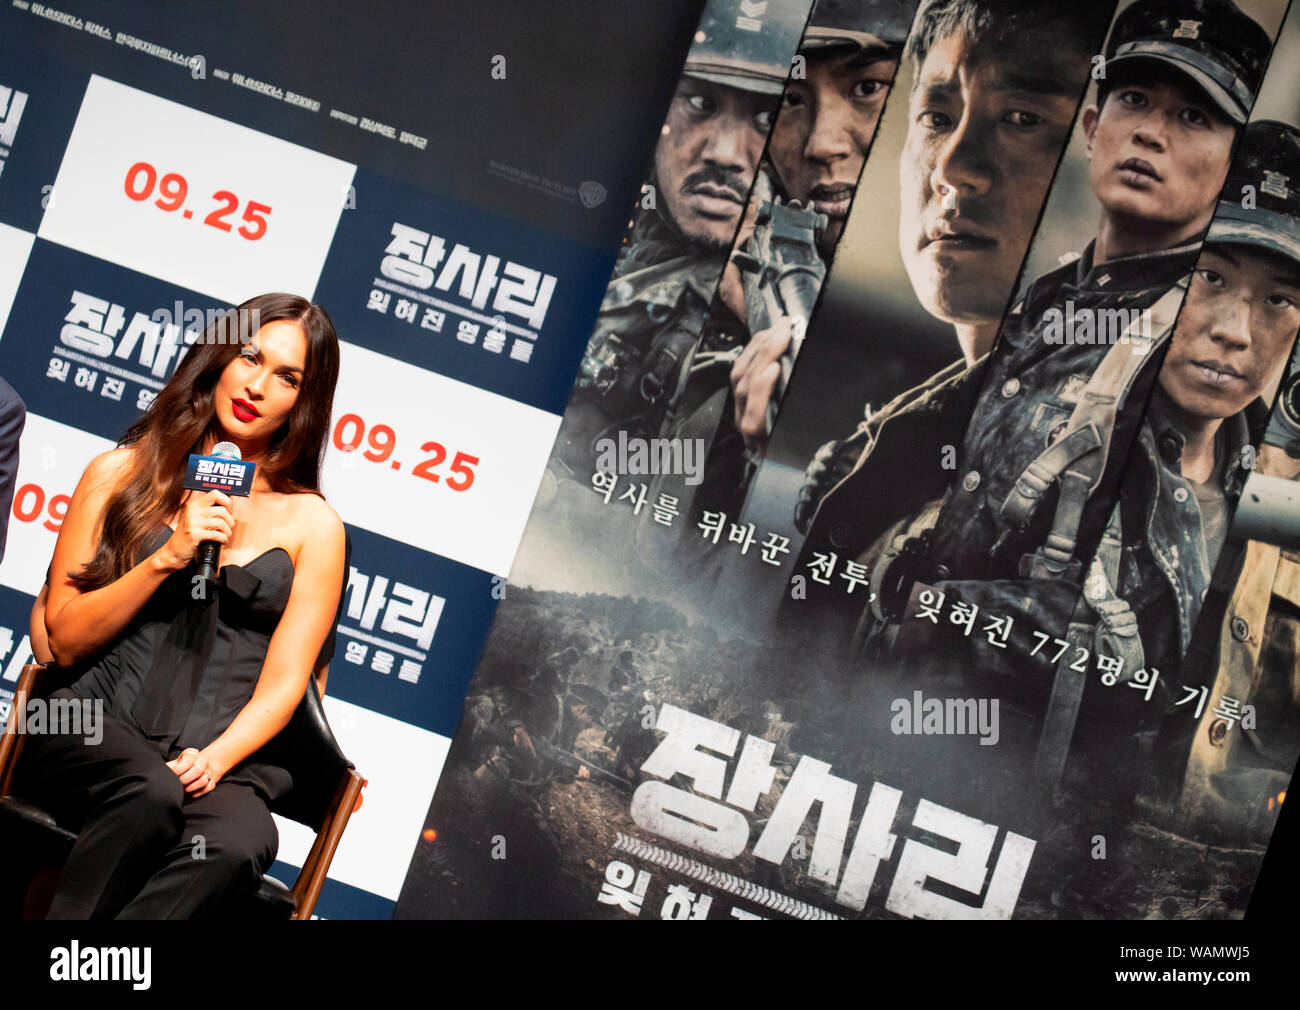 Megan Fox, August 21, 2019 : Hollywood star Megan Fox attends a showcase for her new movie "Battle of Jangsari" at a theater in Seoul, South Korea. The Korean movie tells the story of a group of 772 South Korean student soldiers who fought against North Korea during the 1950-53 Korean War. It will hit local Korean screens on September 25. Credit: Lee Jae-Won/AFLO/Alamy Live News Stock Photo